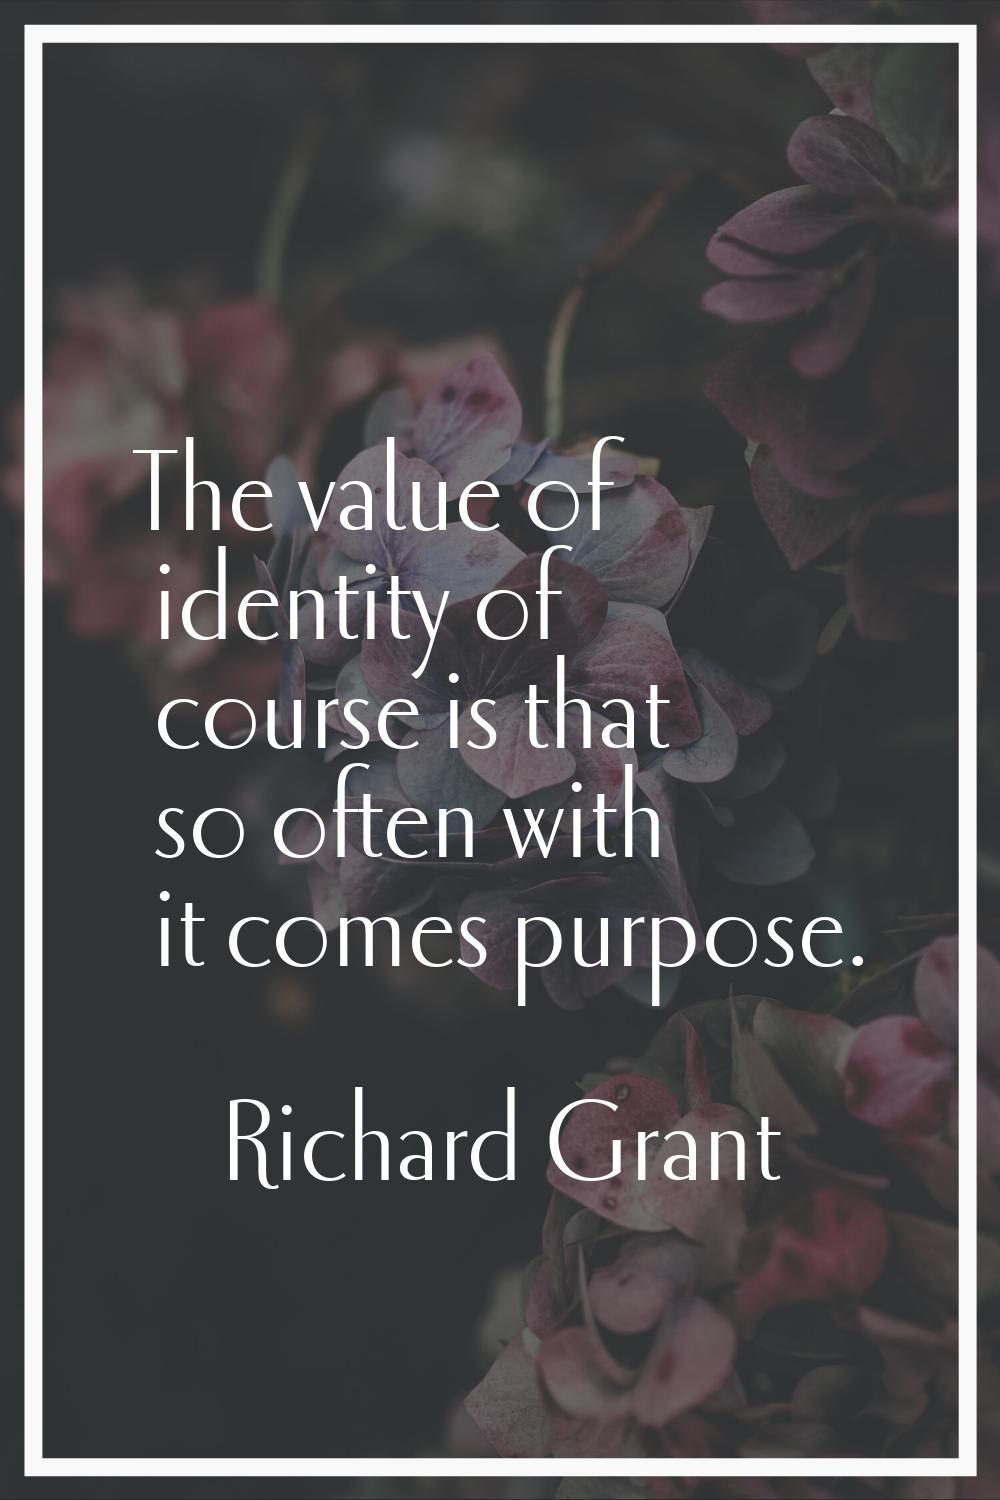 The value of identity of course is that so often with it comes purpose.